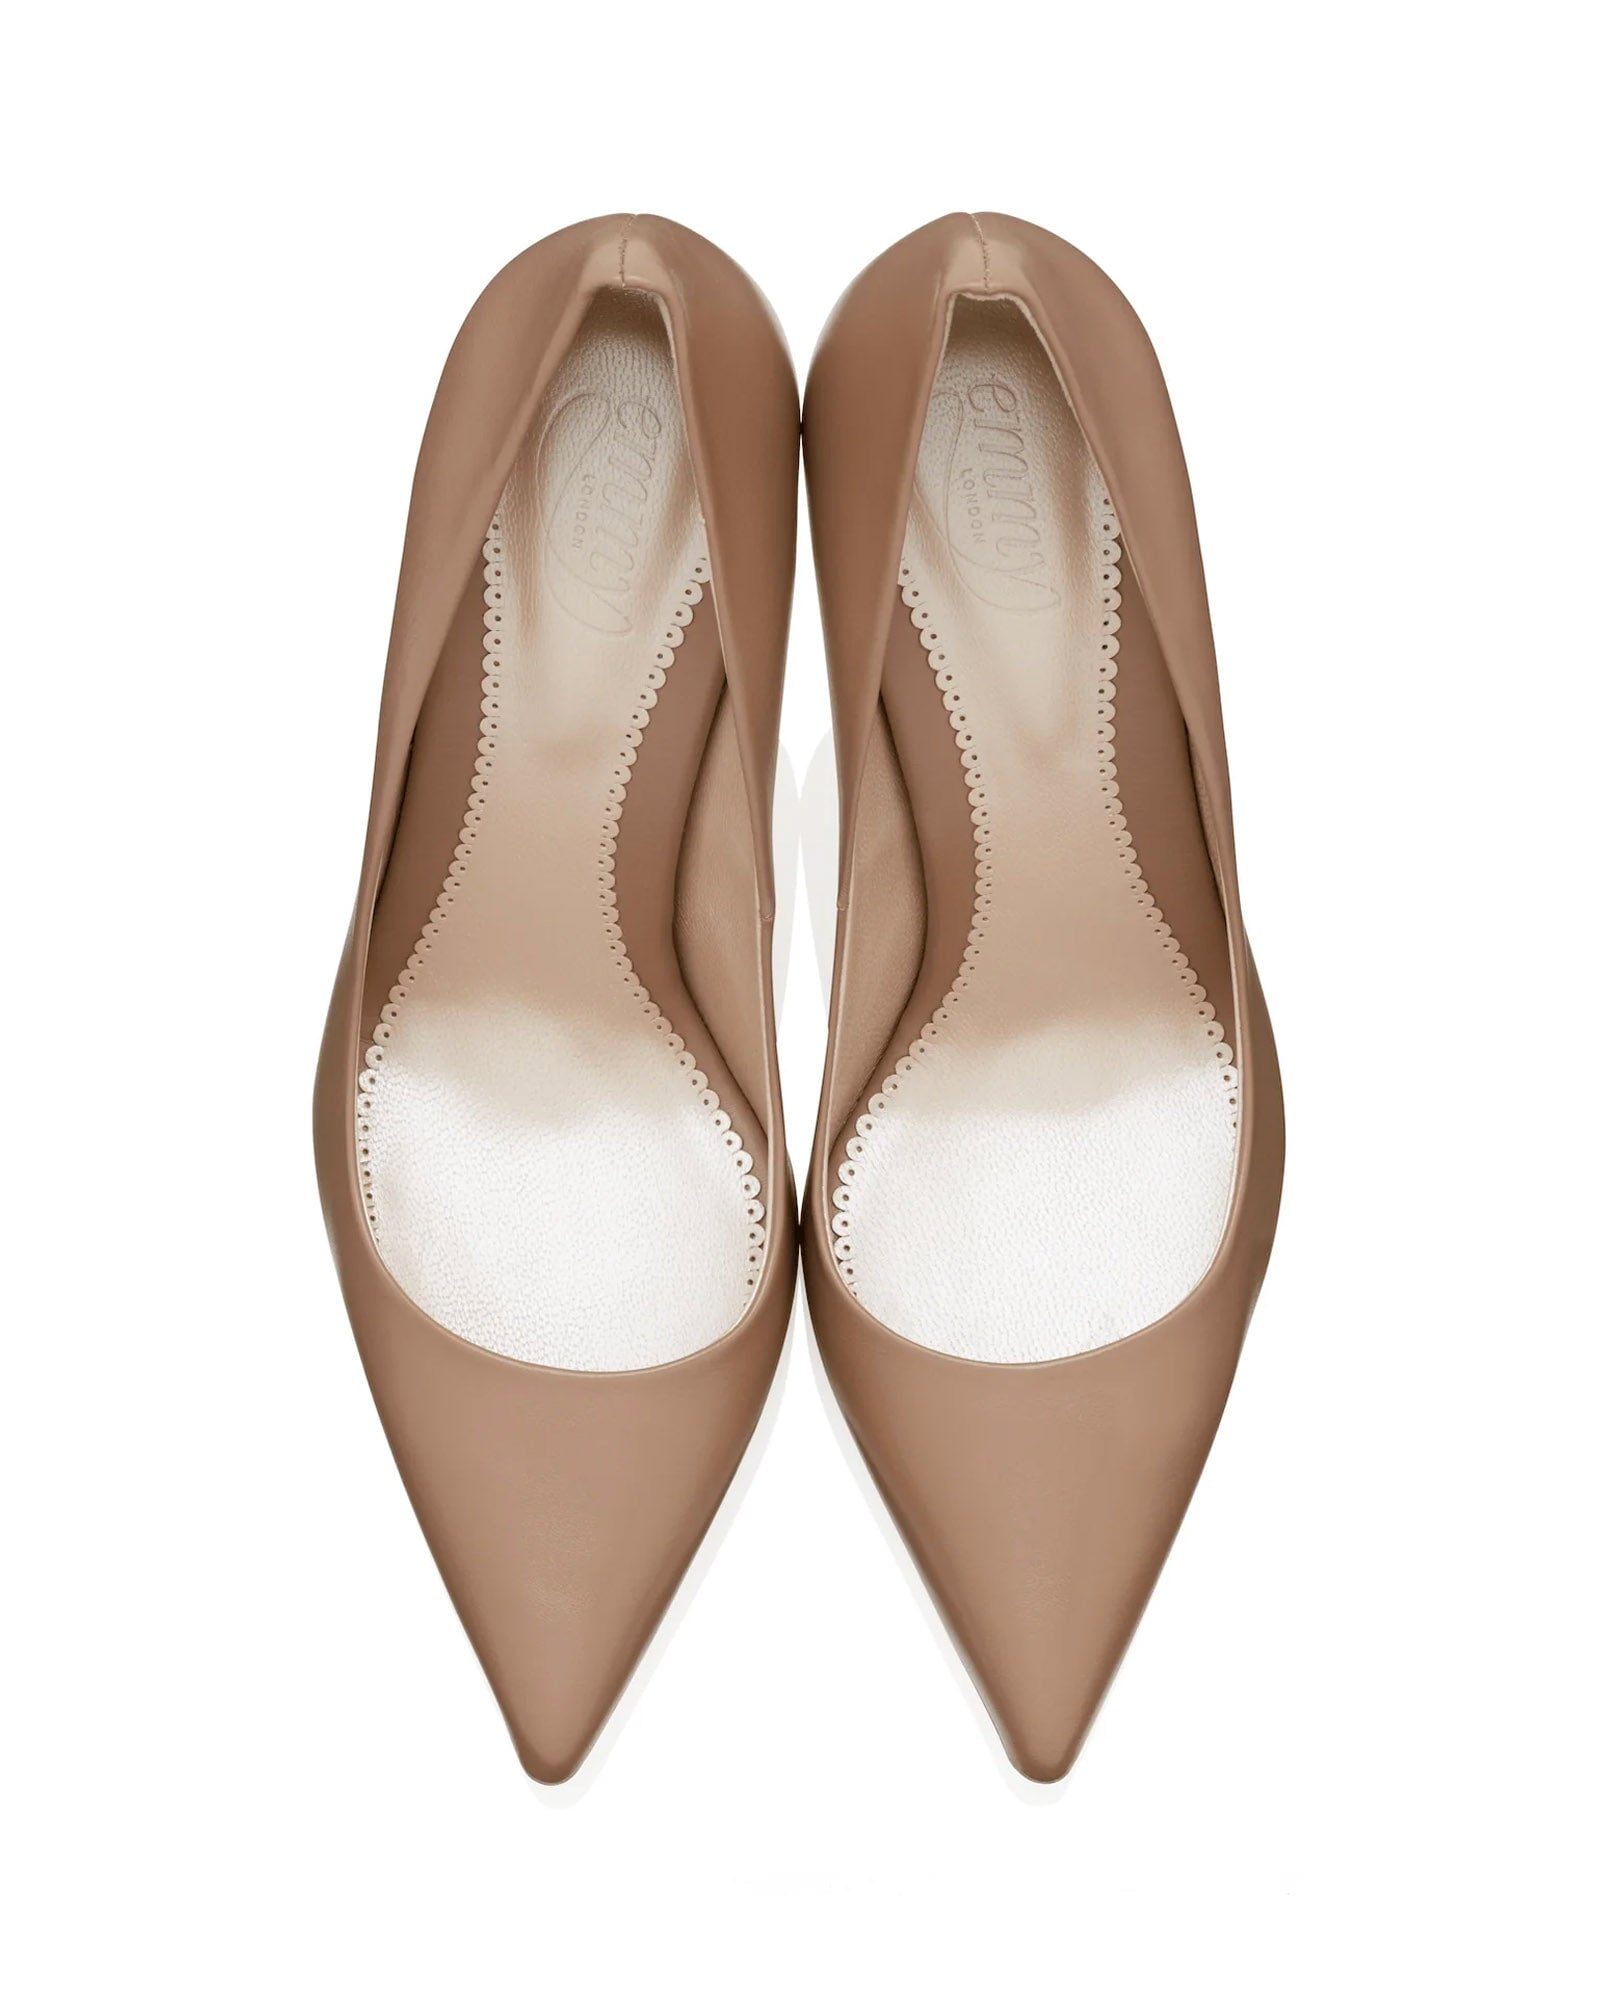 Claudia Tan Leather Fashion Shoe Nude Leather Pointed Court Shoe  image